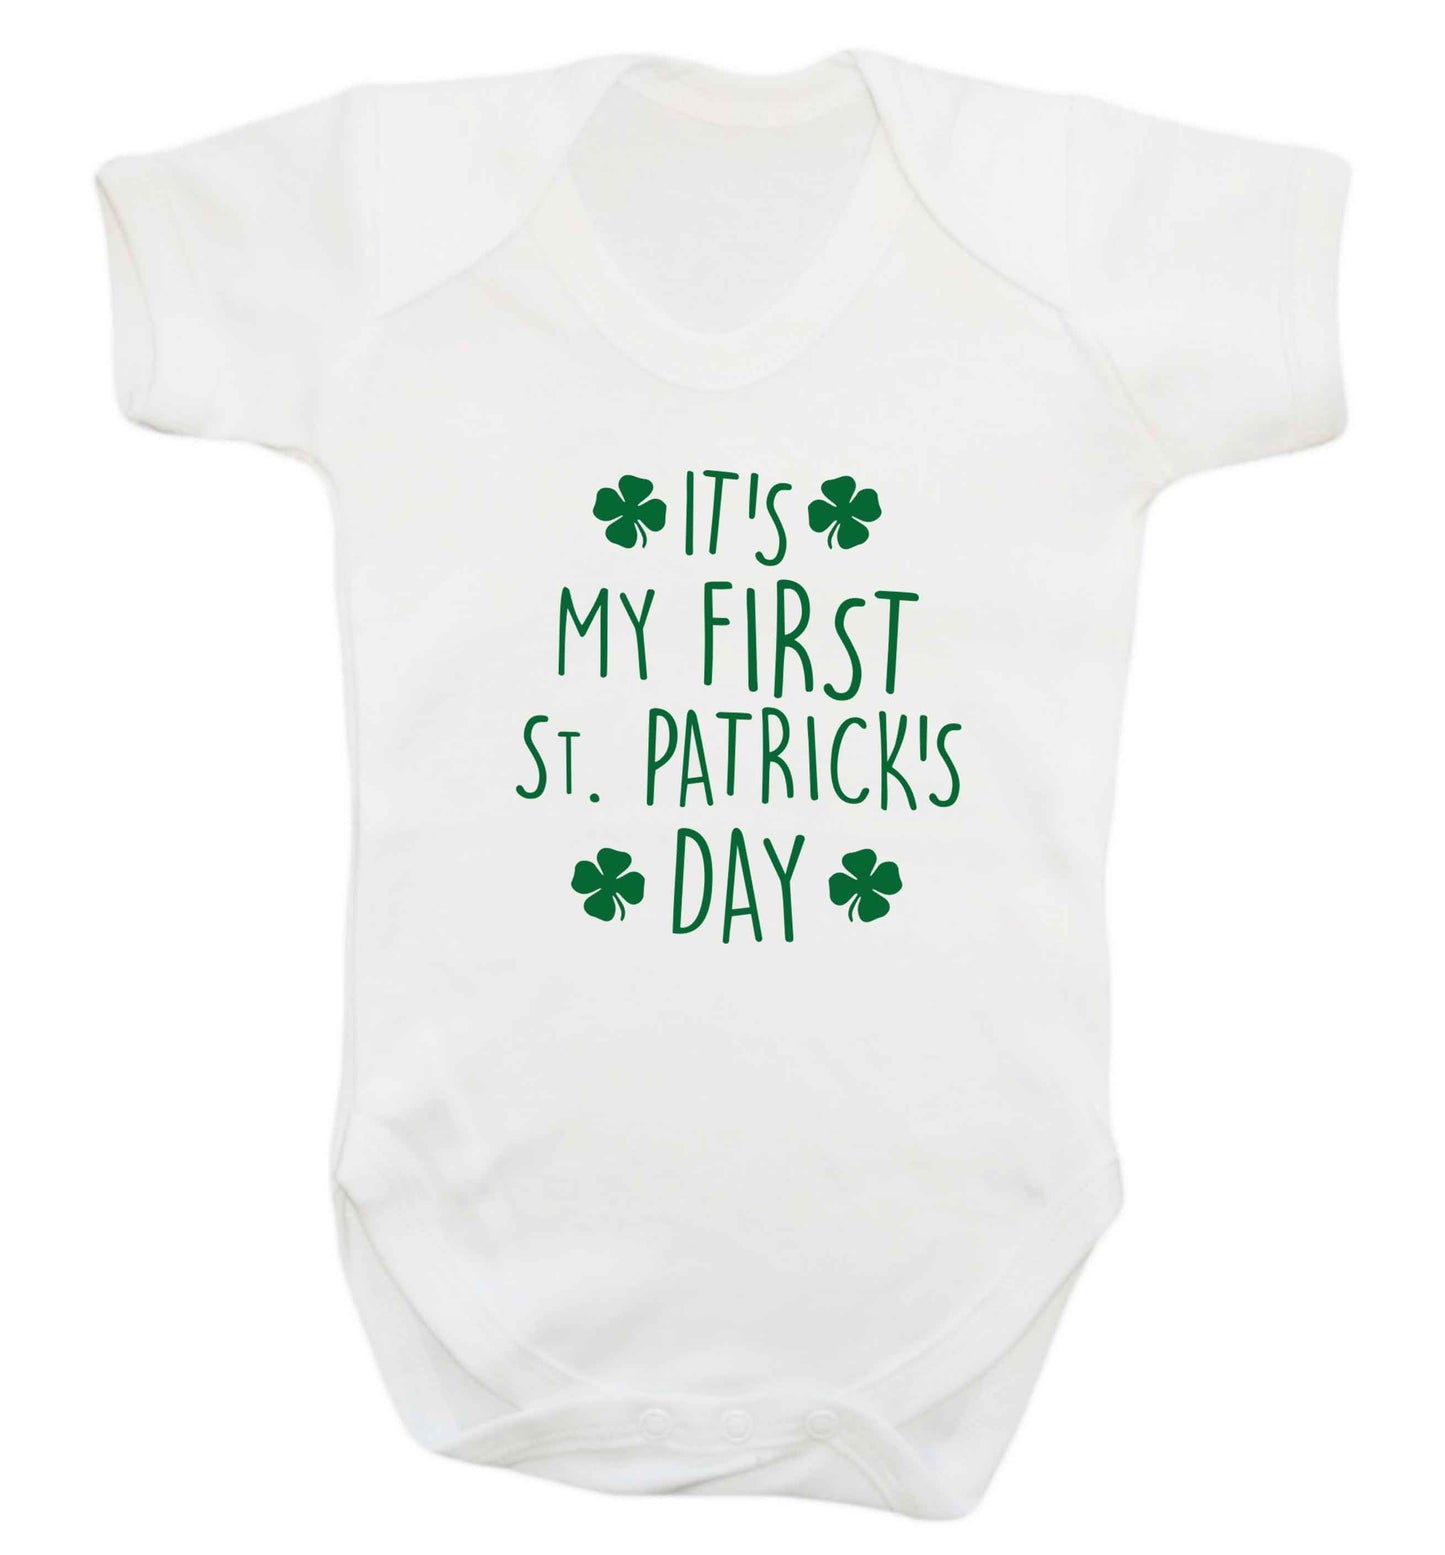 It's my first St.Patrick's day baby vest white 18-24 months